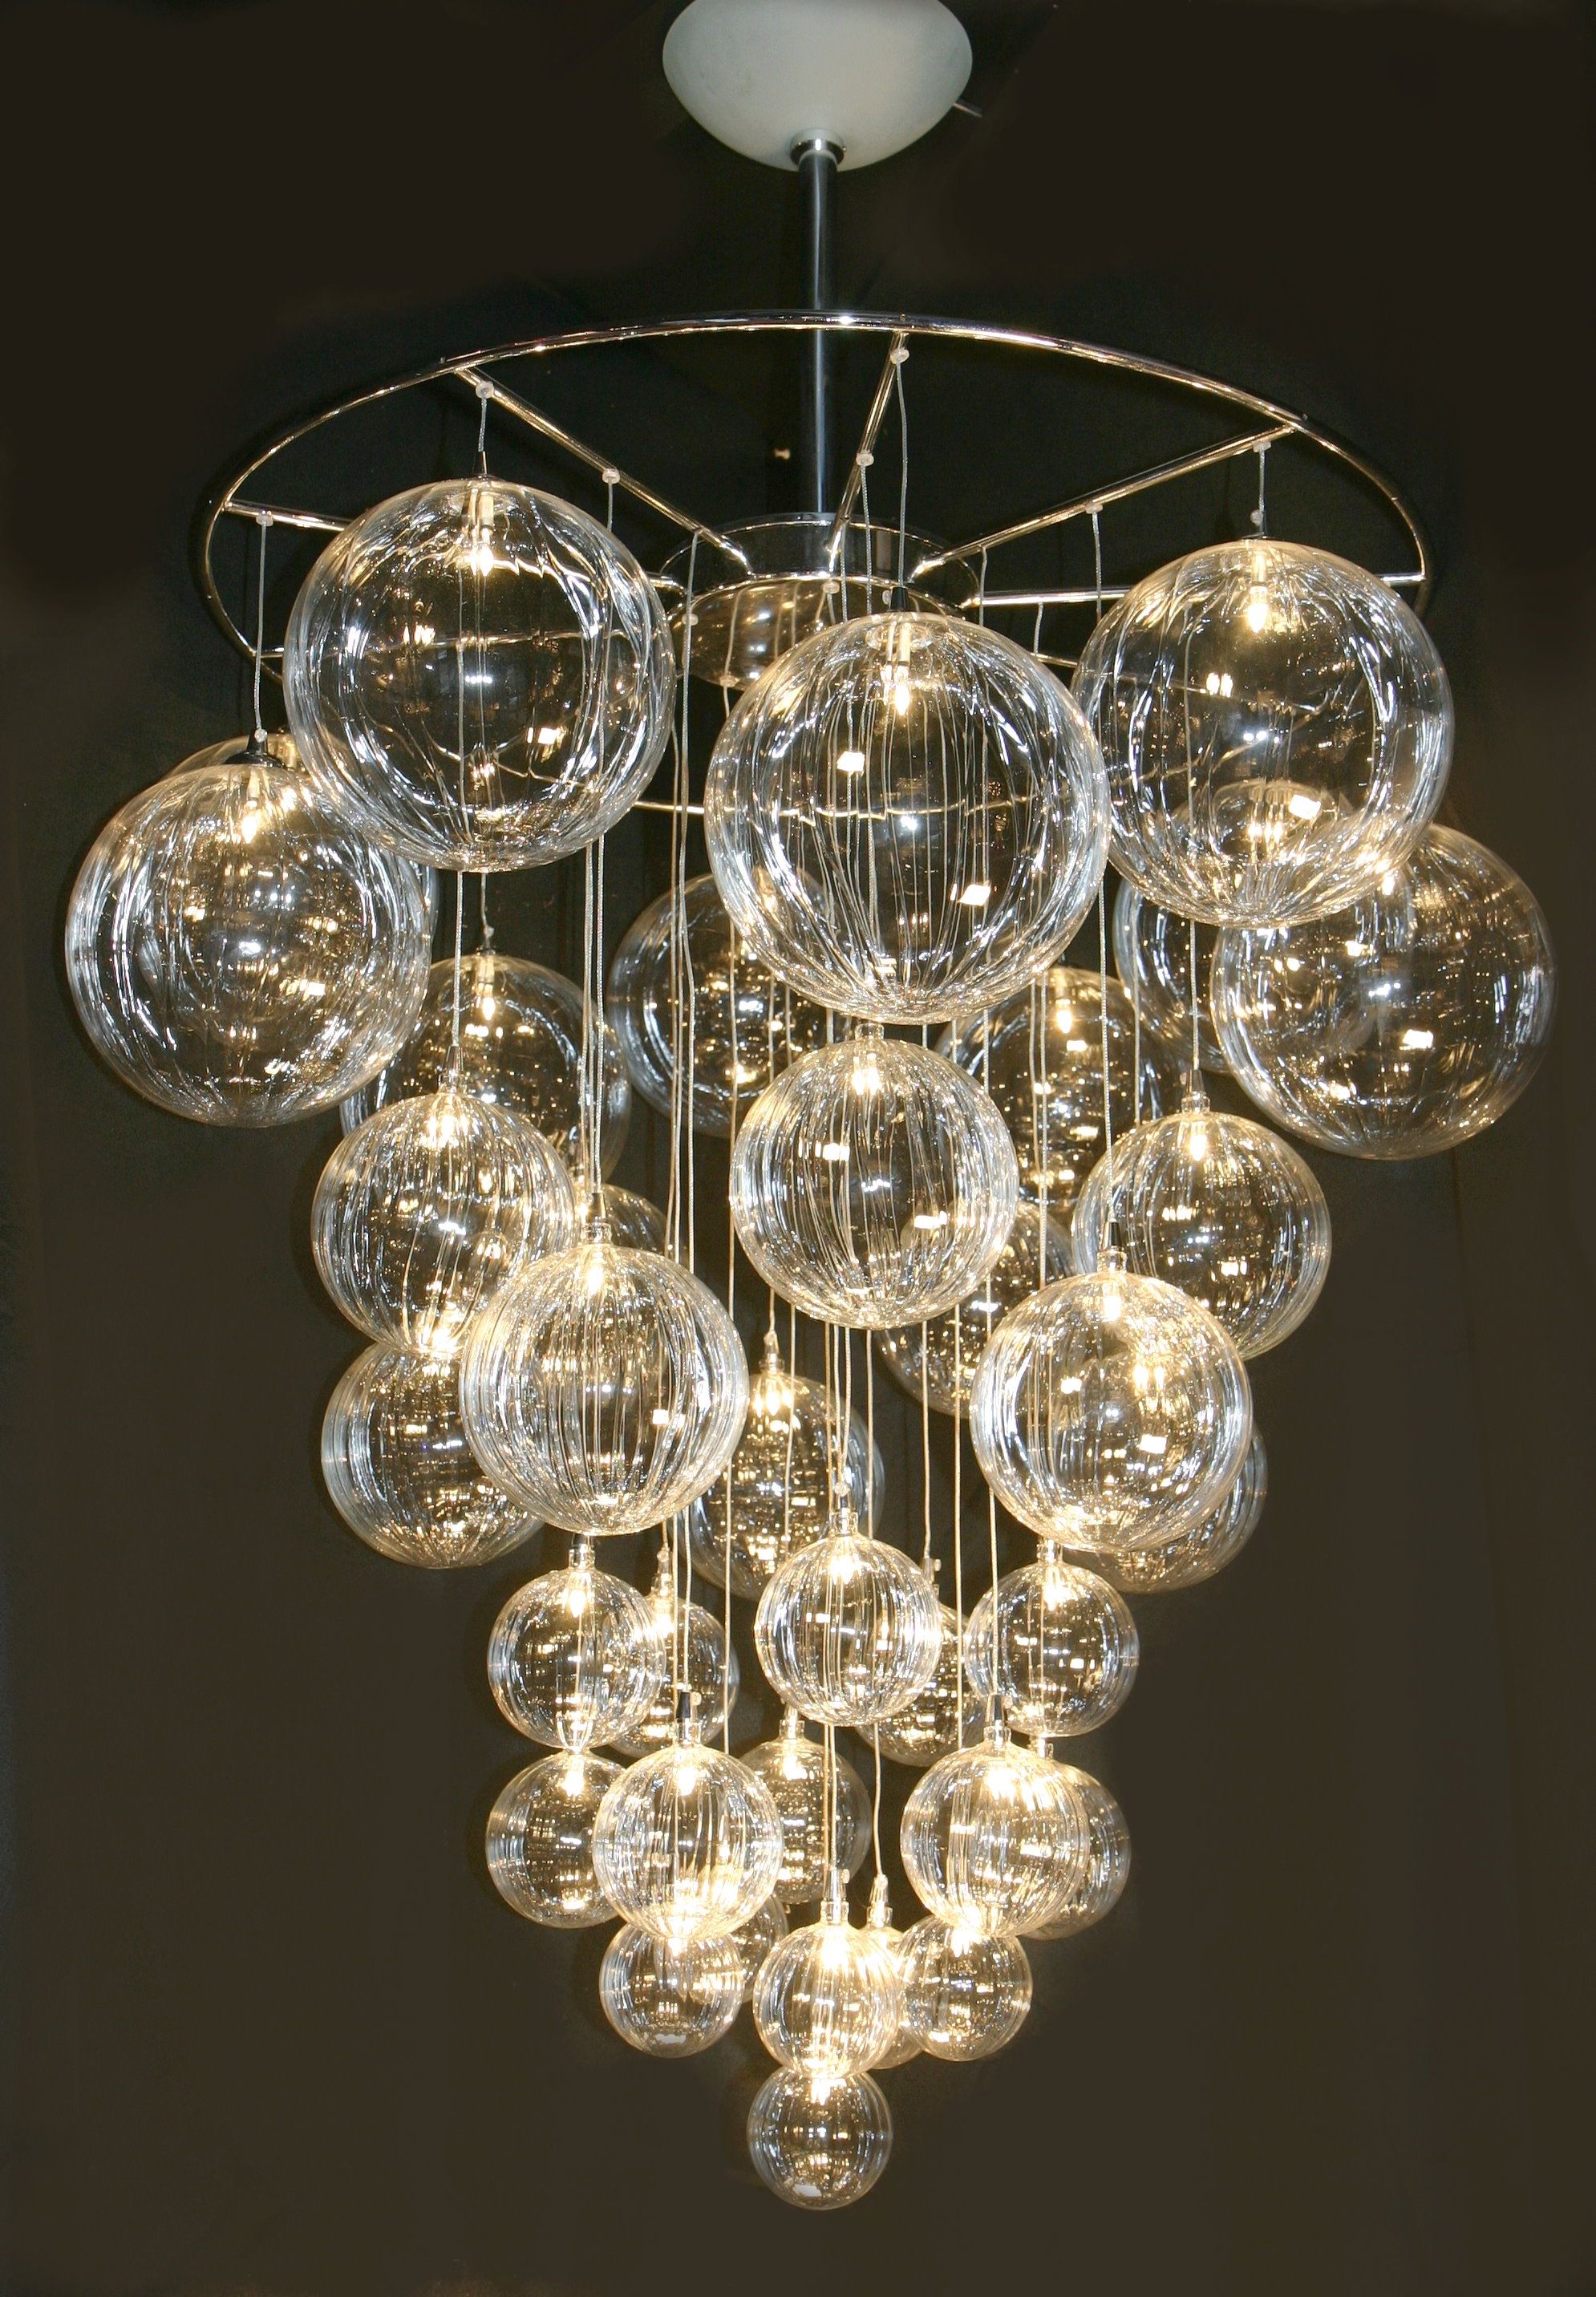 Modern Glass Chandeliers Intended For Modern Glass Chandeliers (View 3 of 12)